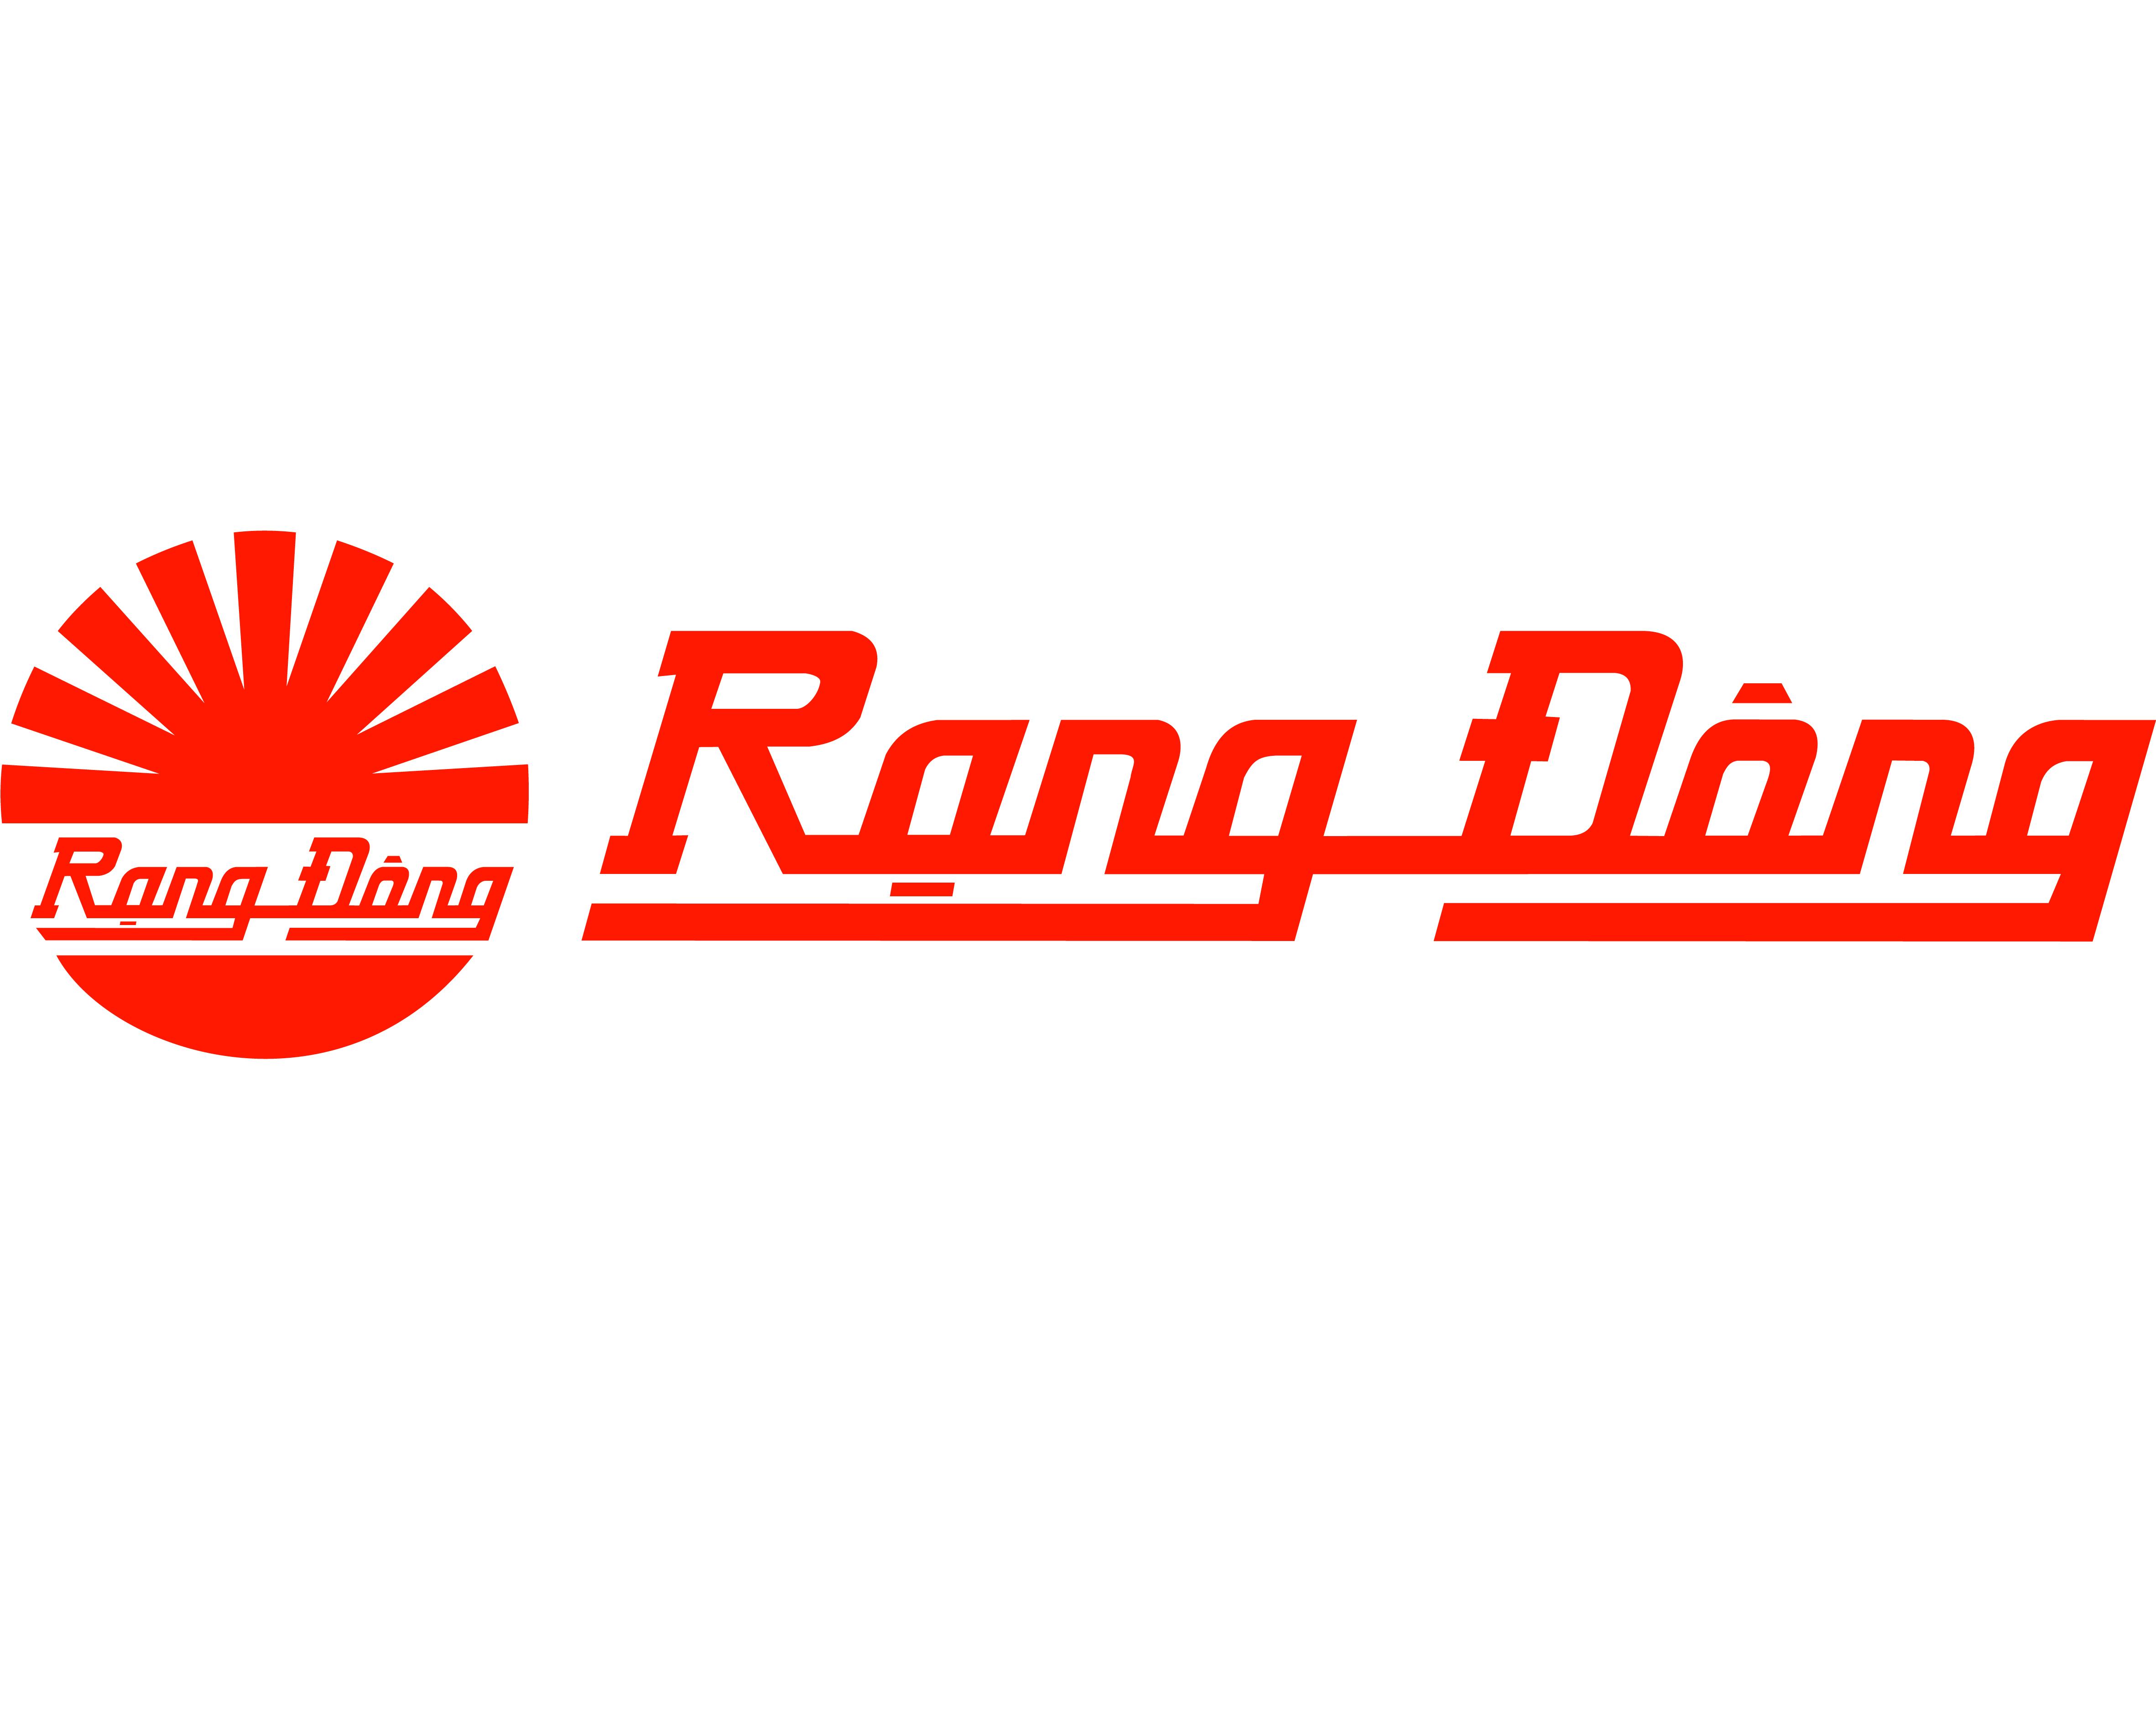 RANG DONG LIGHT SOURCE AND VACUUM FLASK JOINT STOCK COMPANY